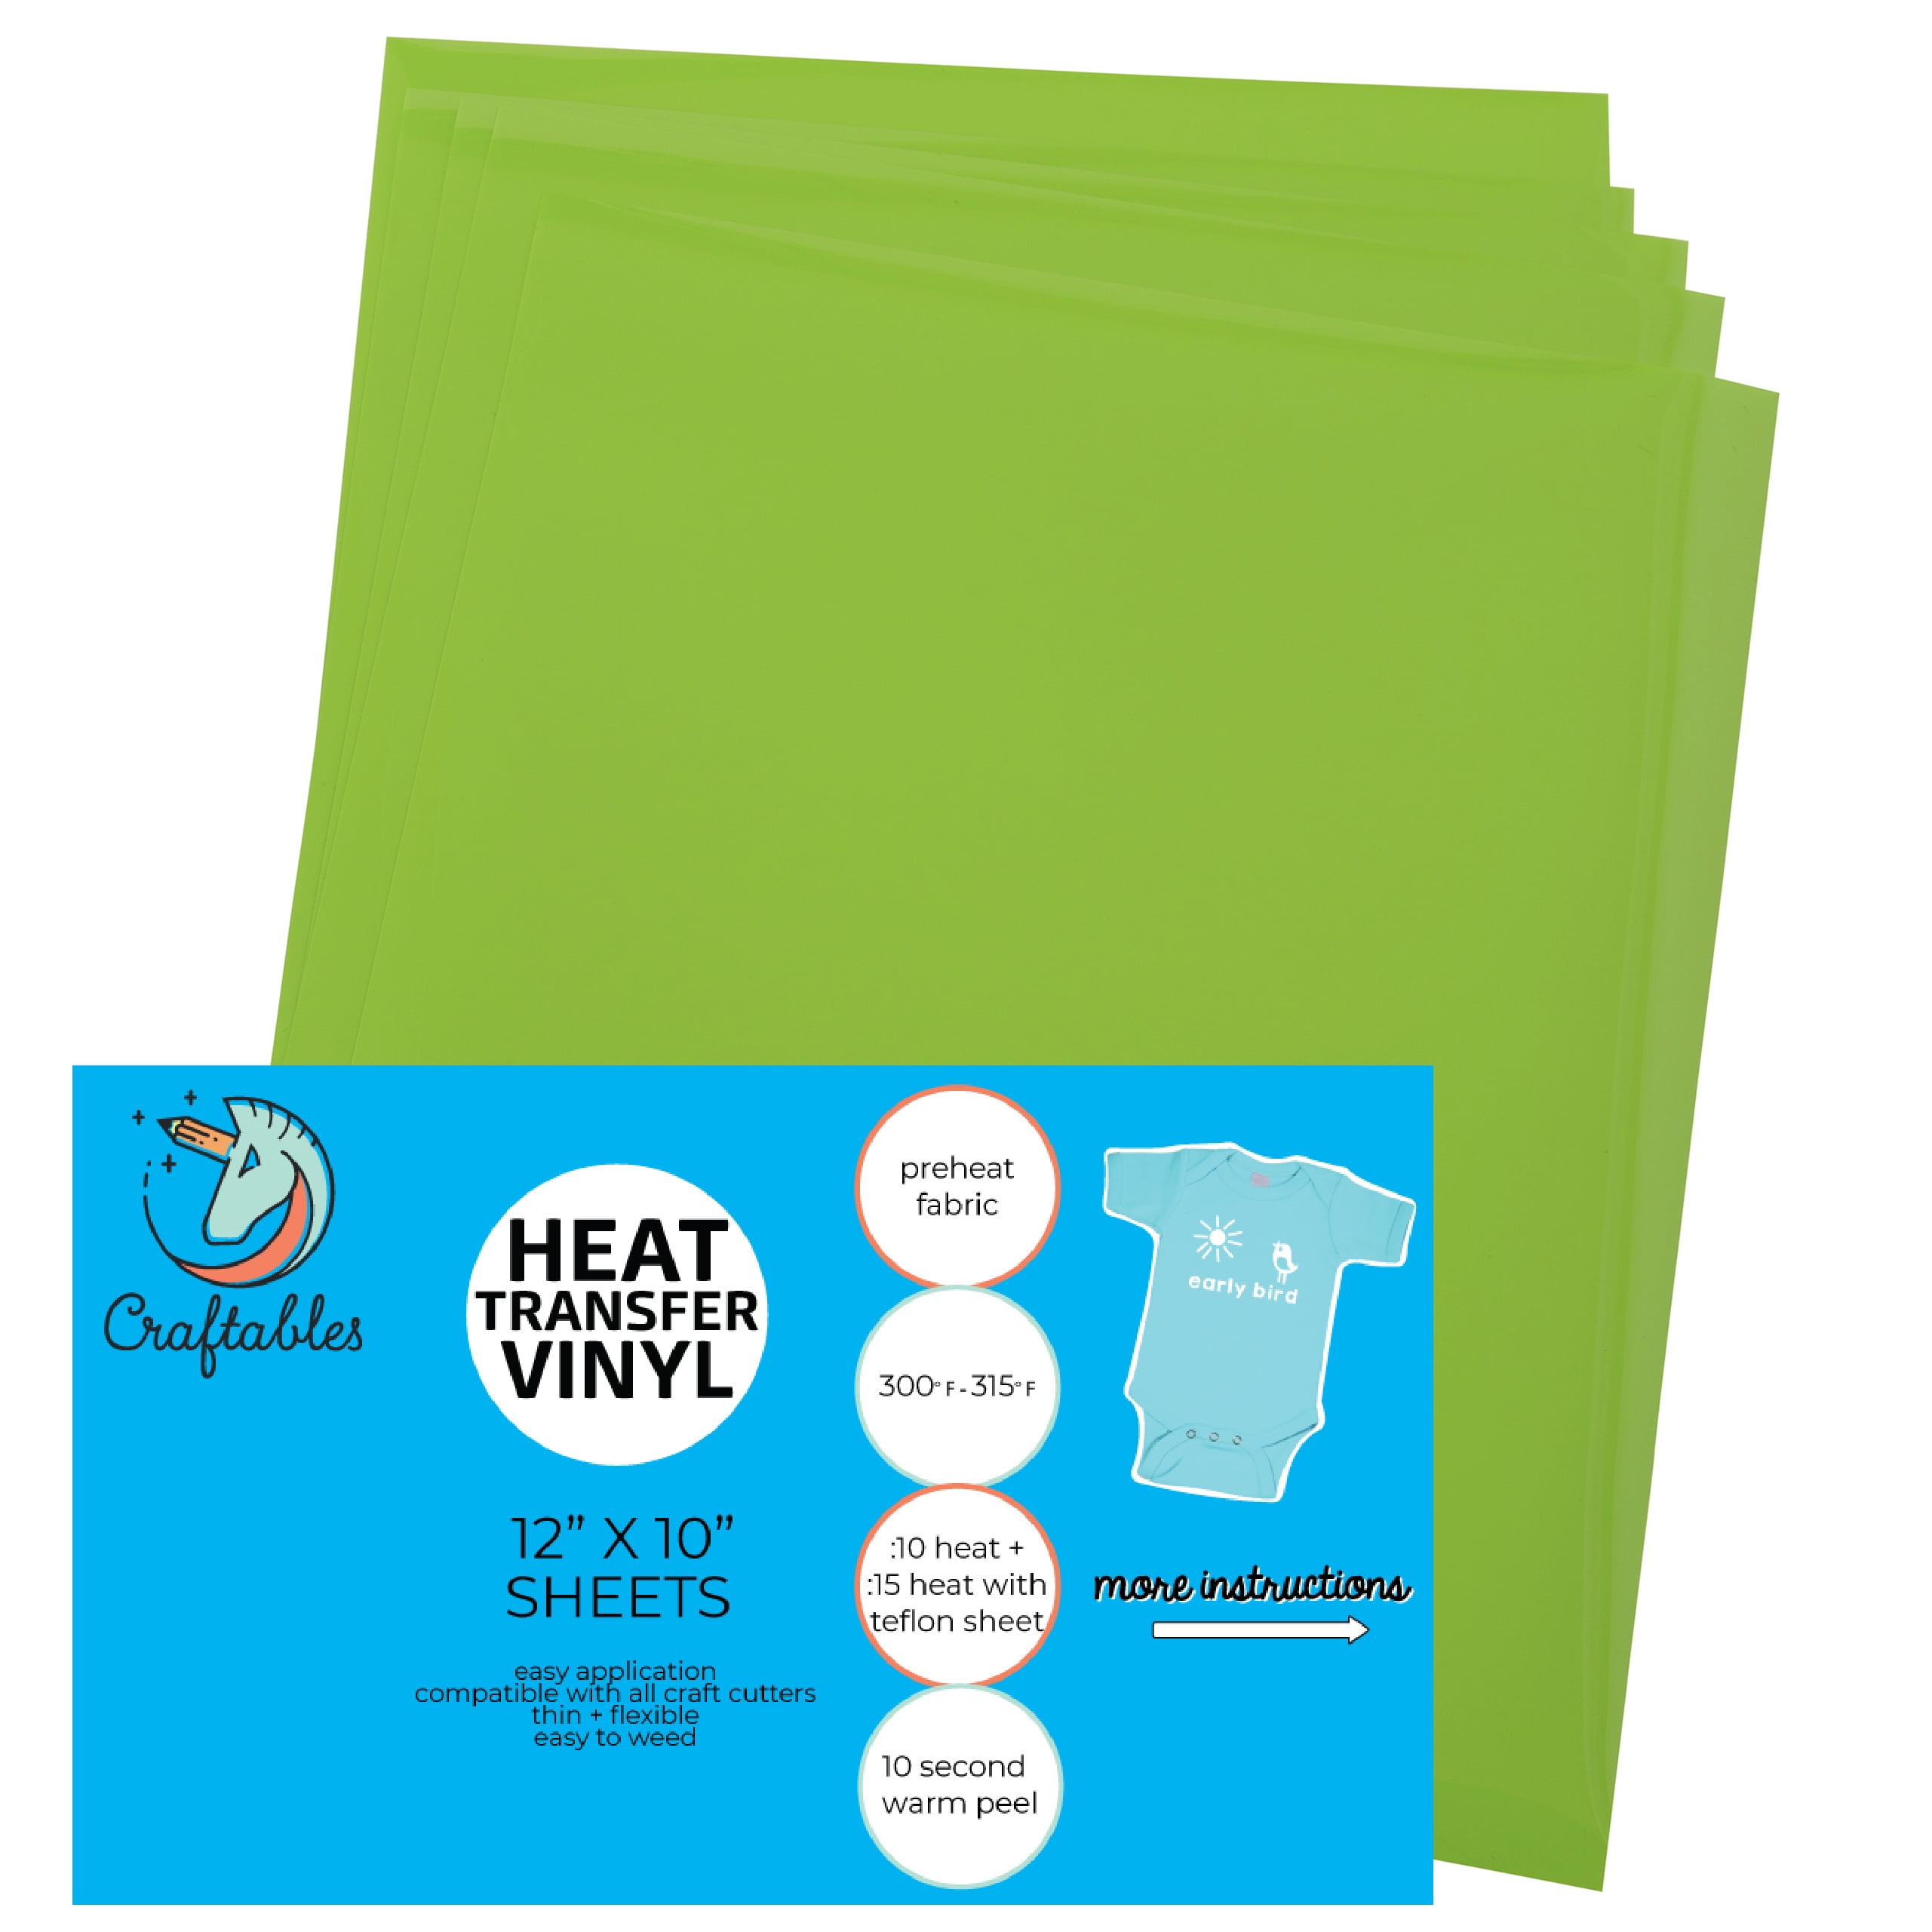 Craftables Black Heat Transfer Vinyl HTV - 5 Sheets Easy to Tshirt Iron on  Vinyl for Silhouette Cameo, Cricut, all Craft Cutters. Ships Flat